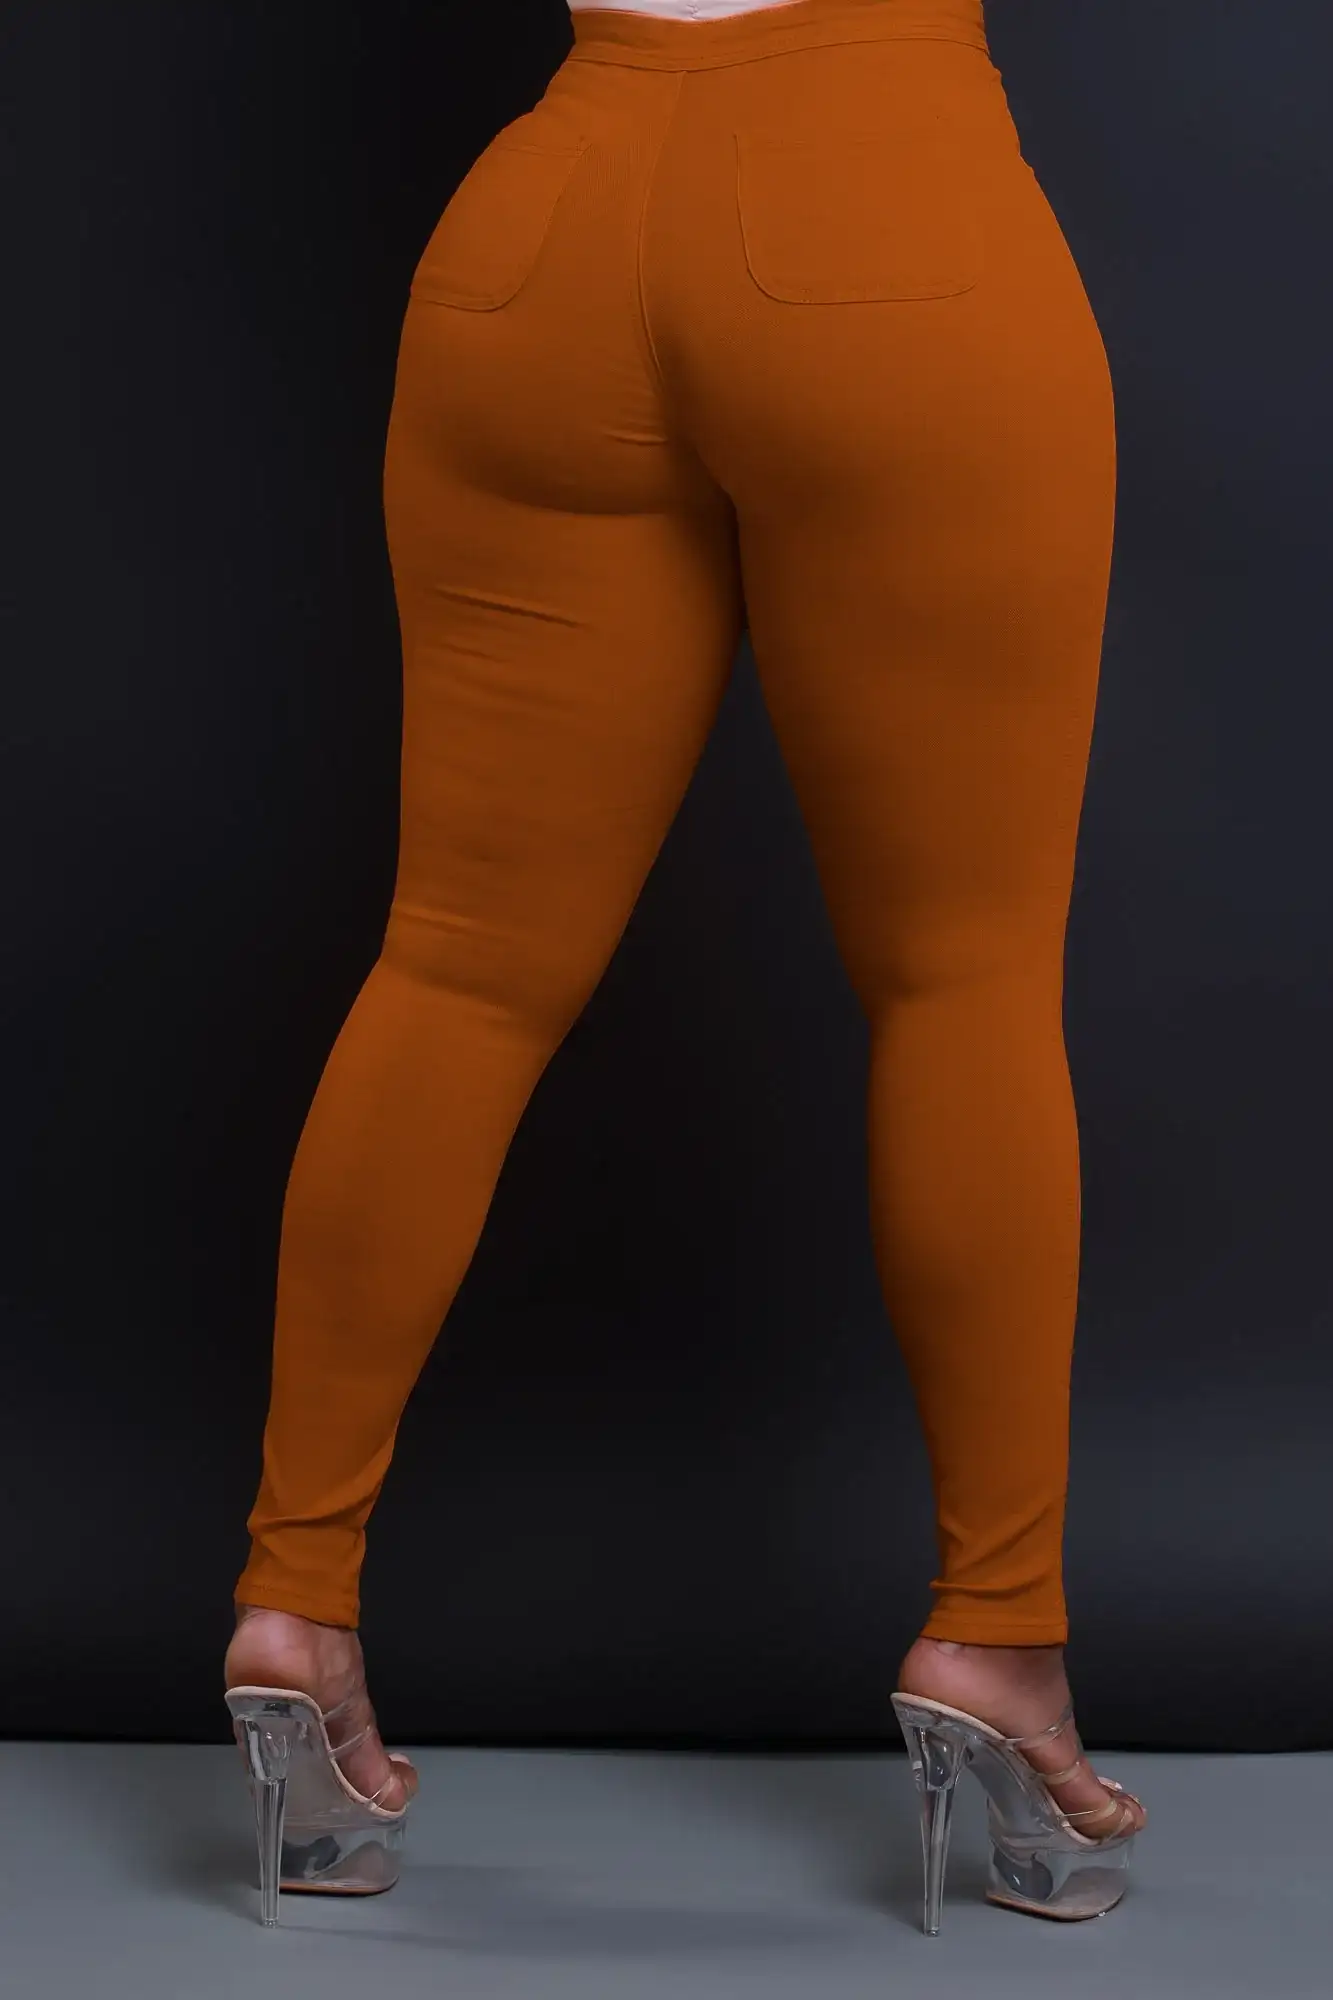 Image of Super Swank High Waist Stretchy Jeans - Caramel